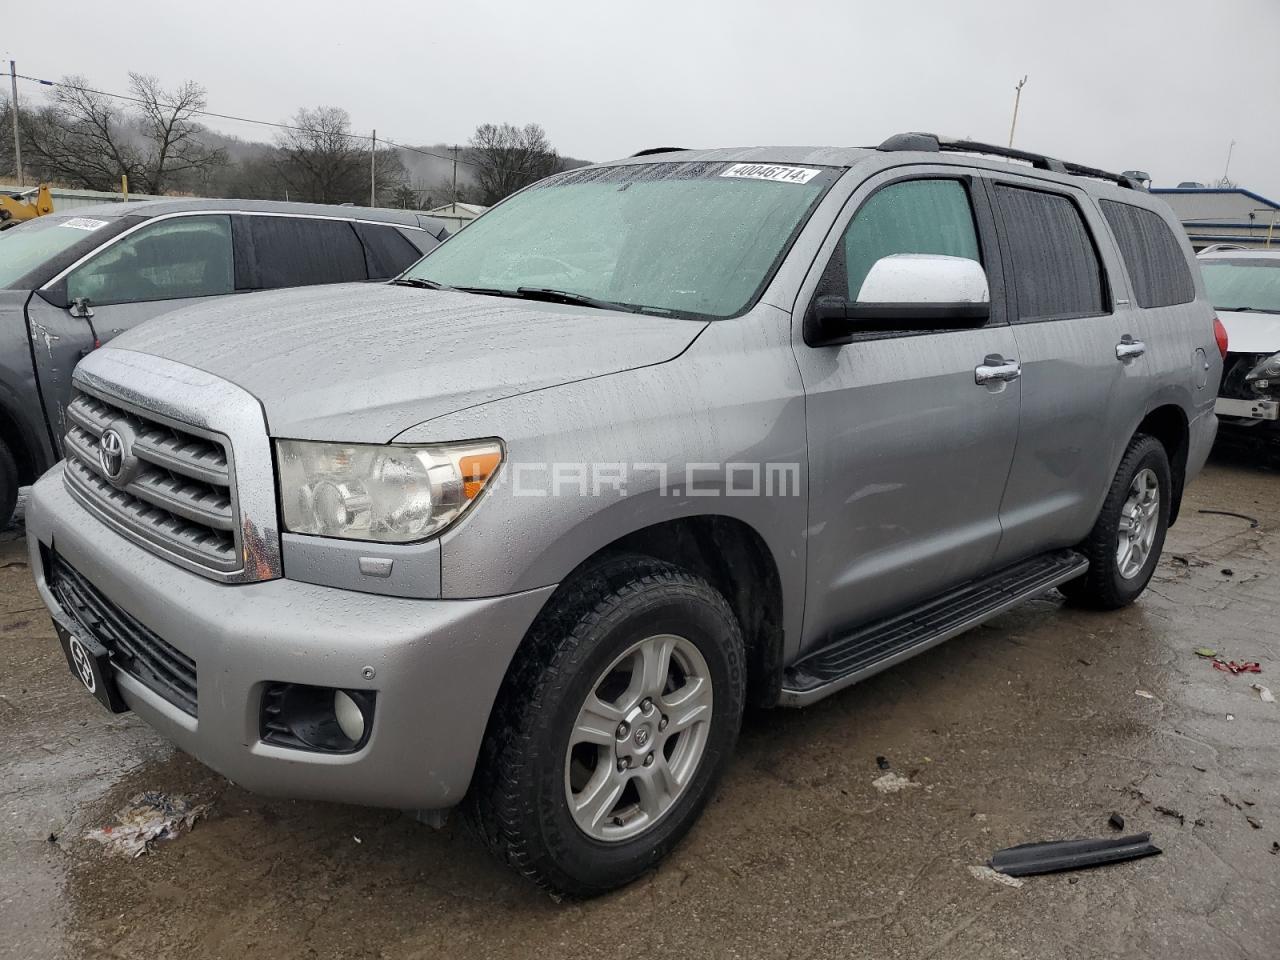 VIN: 5TDBY68A88S015422 - toyota sequoia